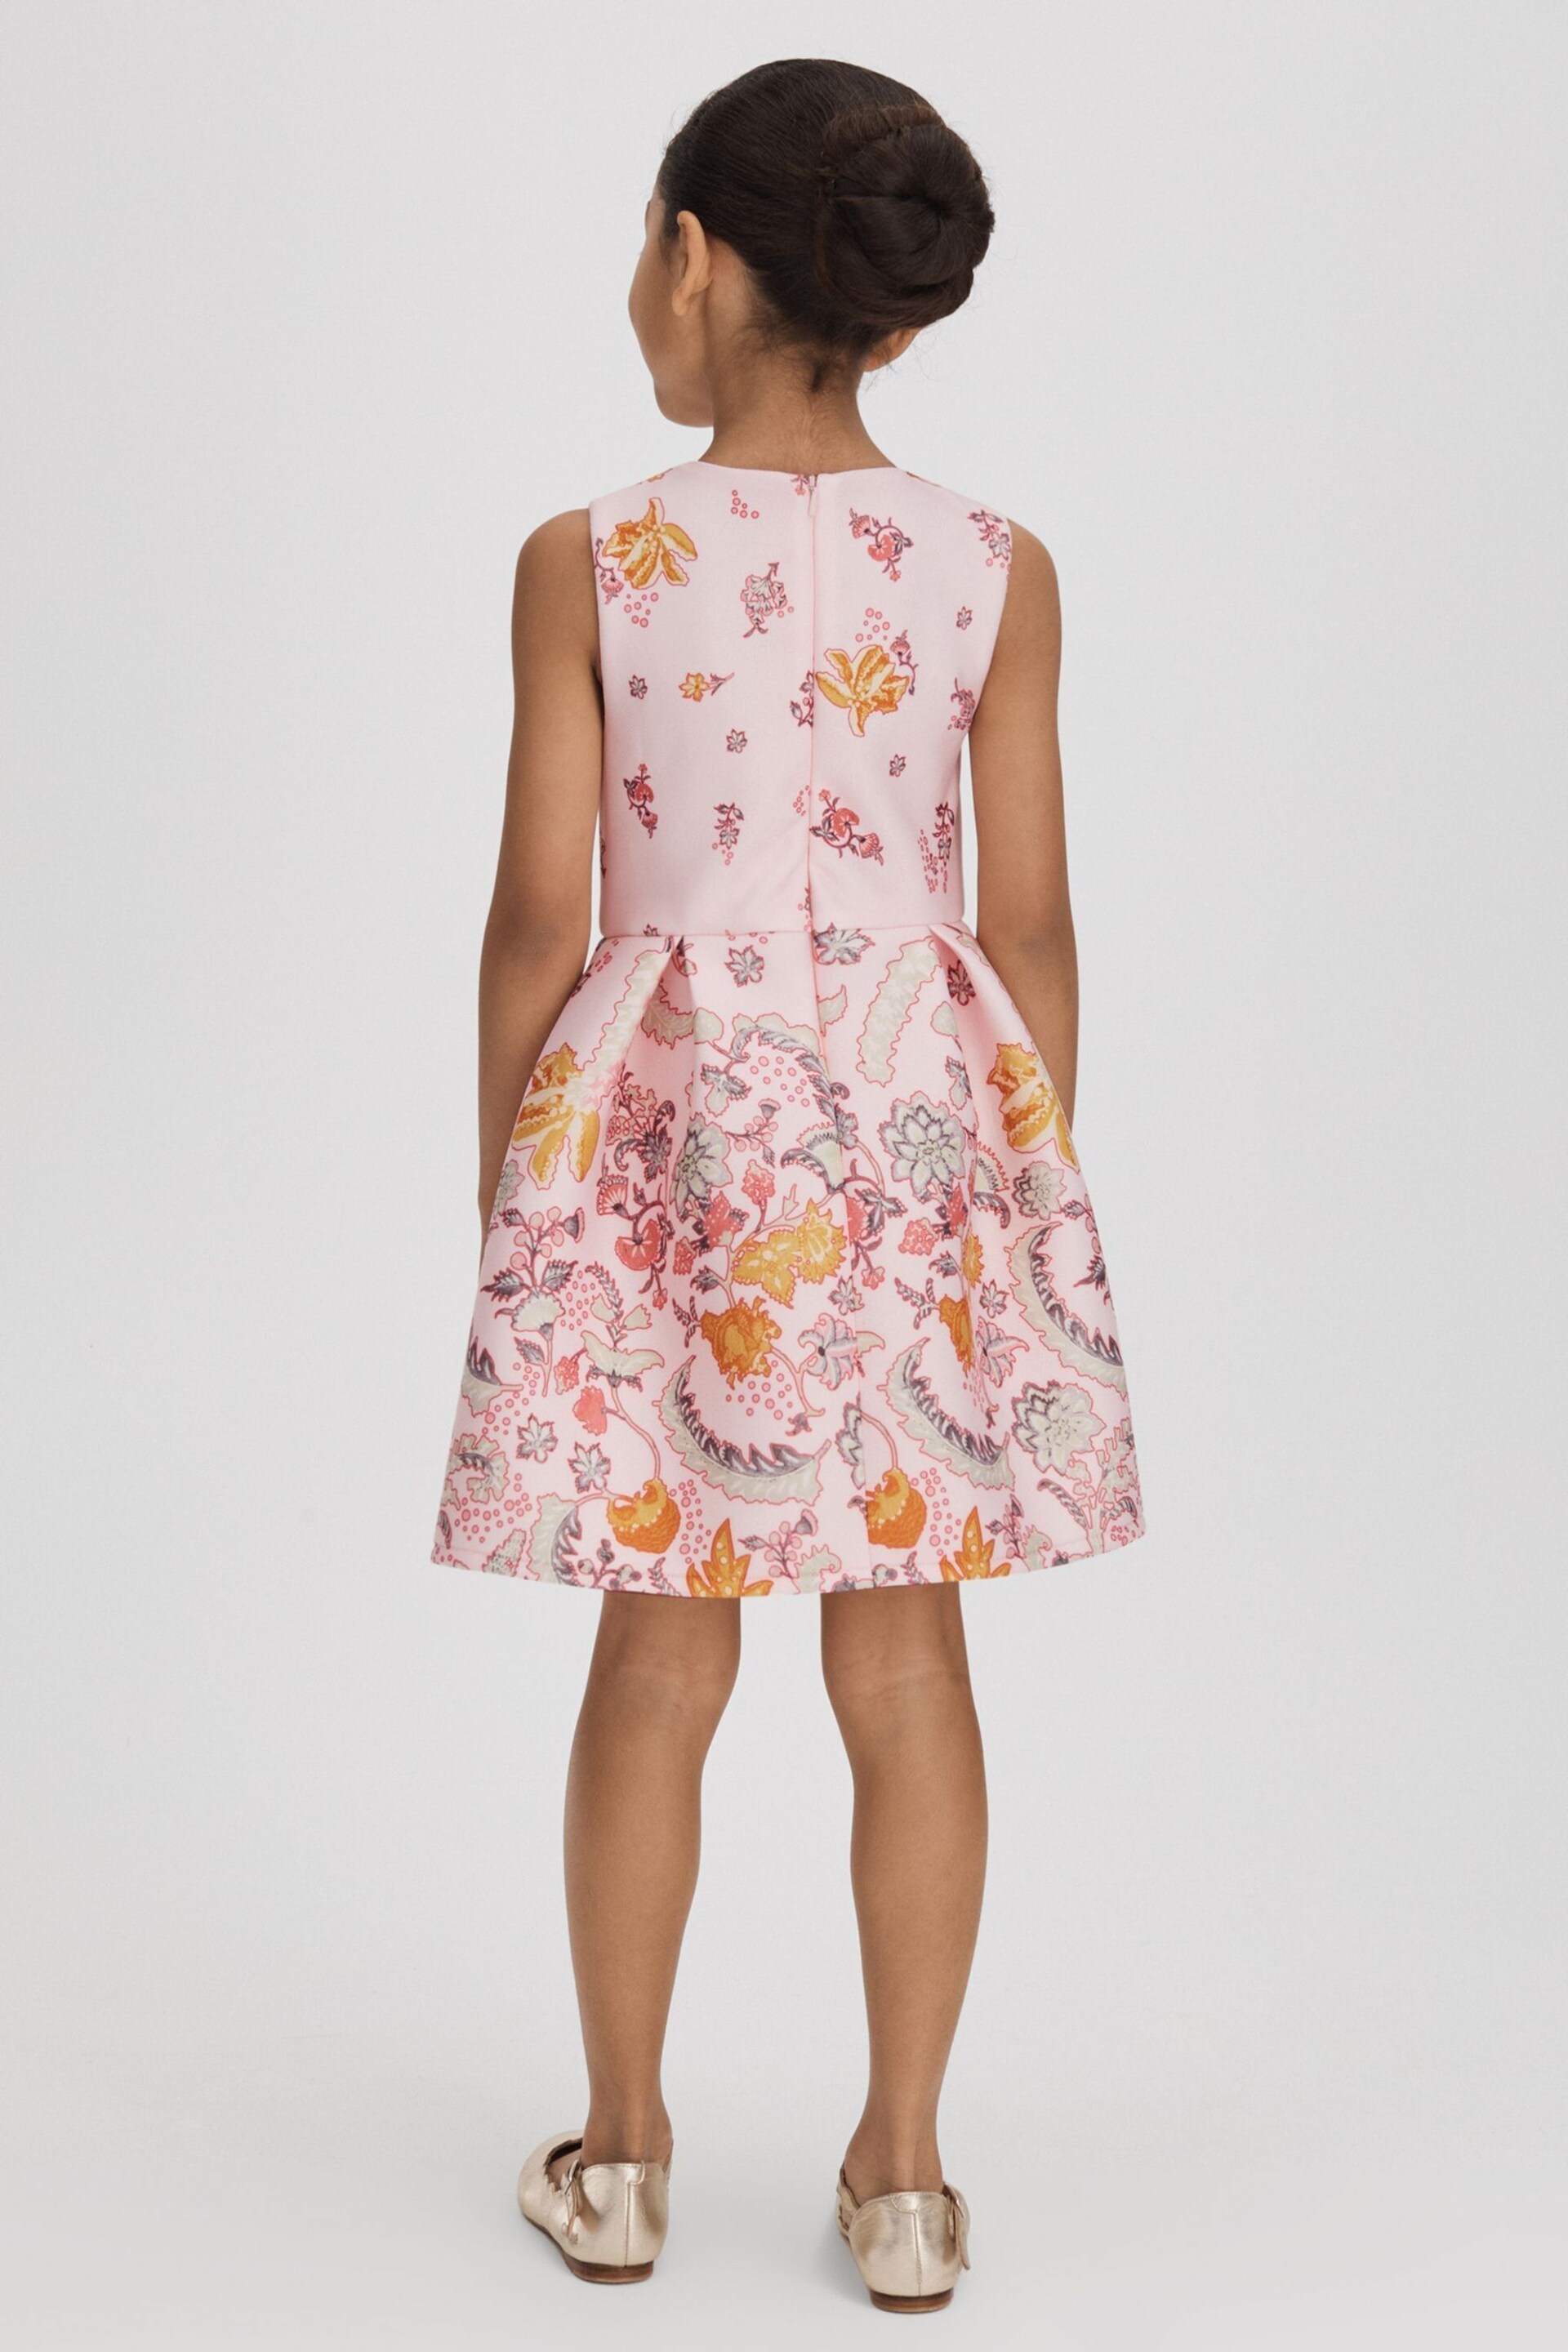 Reiss Pink Alice Teen Scuba Bow Fit-and-Flare Dress - Image 6 of 6